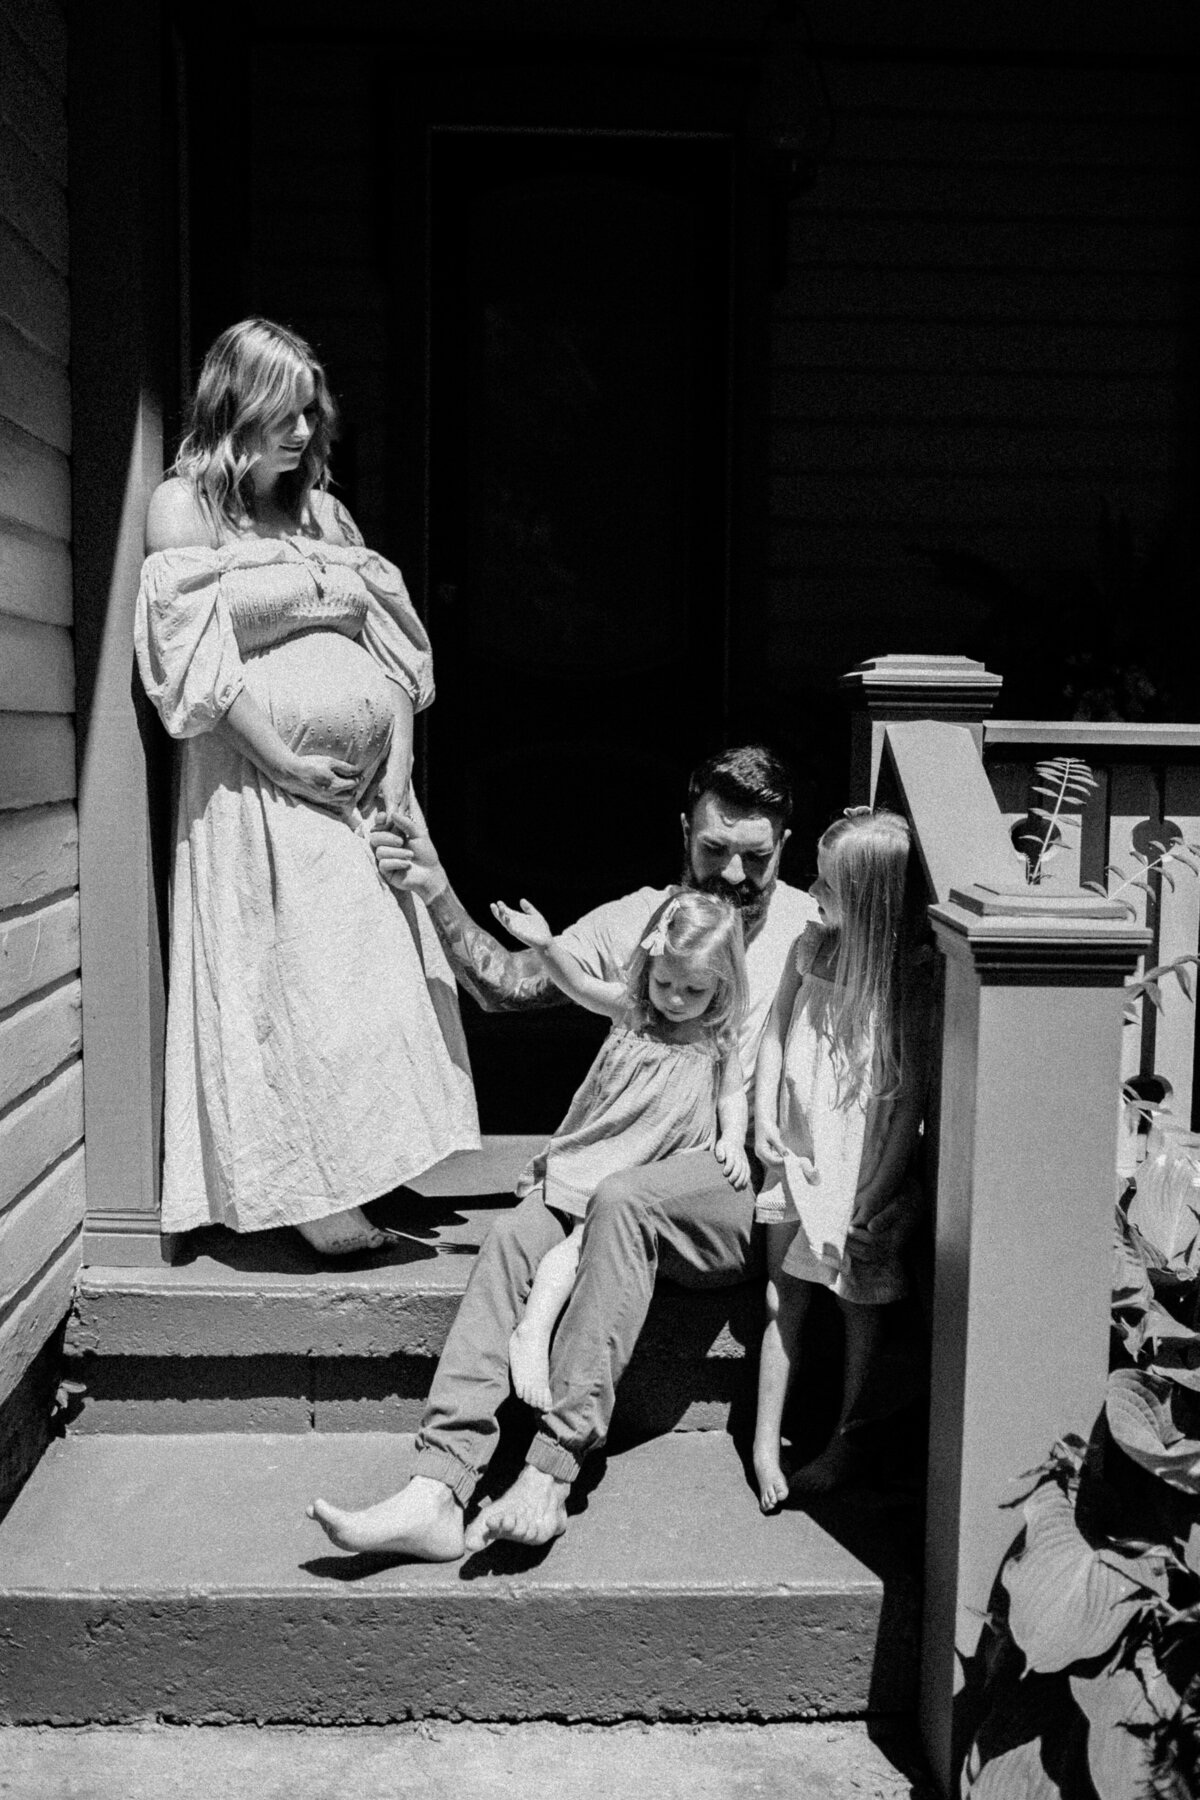 black and white image mothe rand father holding children on porch